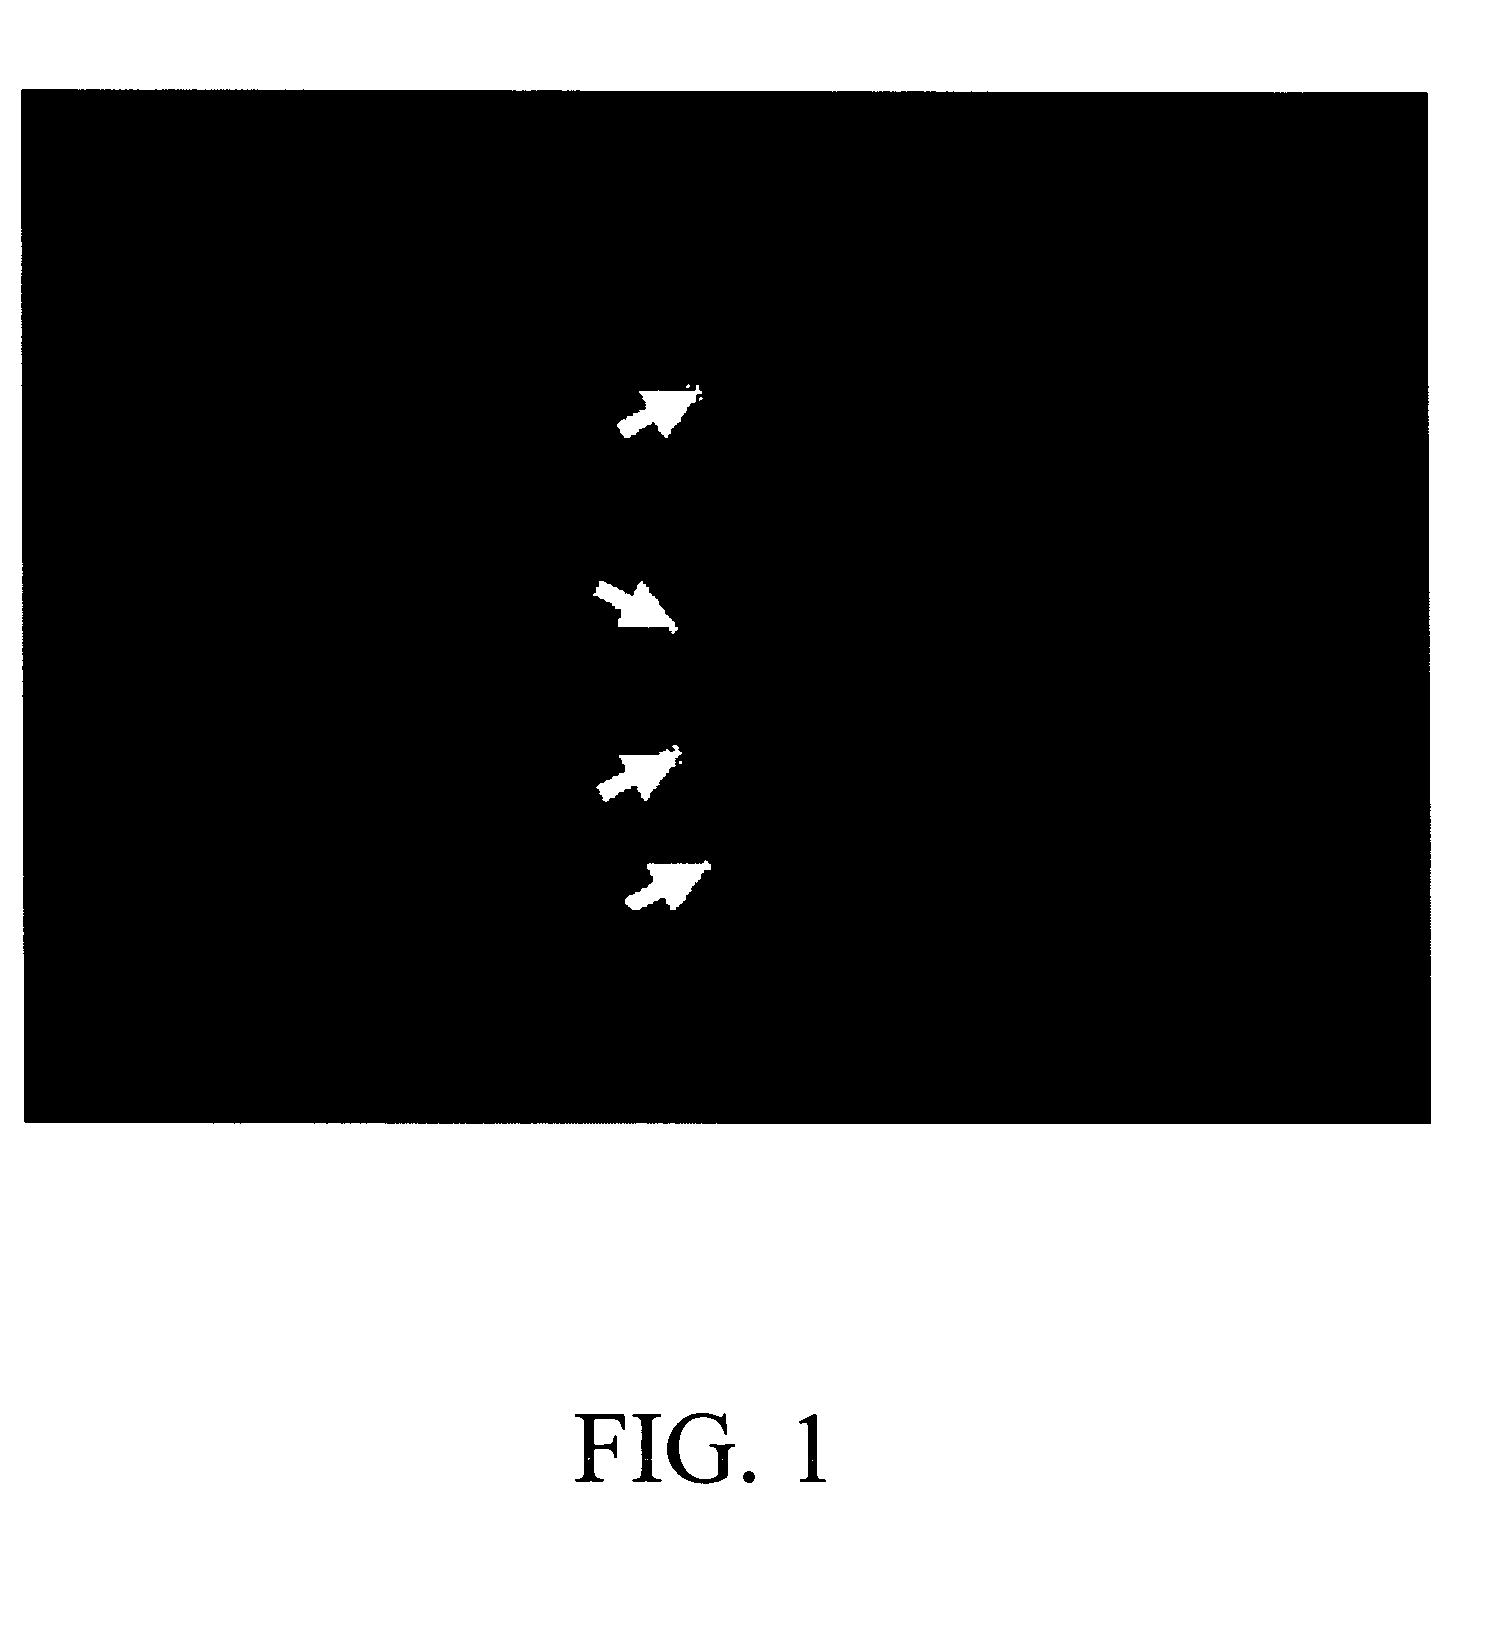 Method for virtual endoscopic visualization of the colon by shape-scale signatures, centerlining, and computerized detection of masses